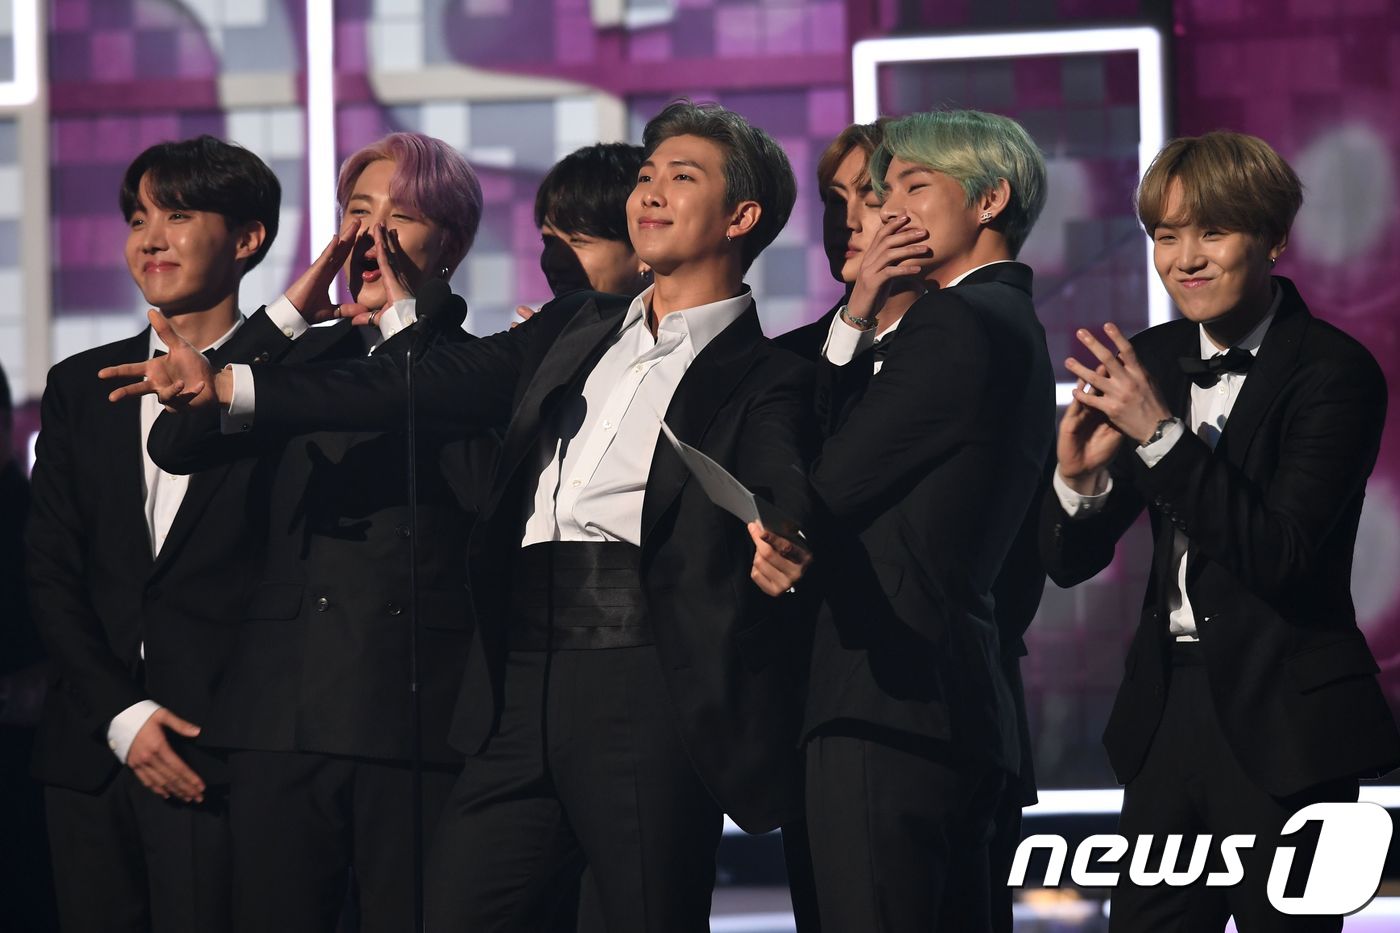 BTS attended the 61st Grammy Awards at the United States of America Los Angeles Staples Center on the 11th (Korea time).This is the first time Grammy has invited an Asia star as well as a Korean singer.BTS was awarded the Best R & B album category on the day.Although it has been on stage for a short time, it has been evaluated as having made a mark on the Grammy Awards just by leaving the prize of the important category.The Grammy Awards are the United States of America awards ceremony, but they are also awards that cover former World music.As it has been in its 61st year this year, it boasts the highest authority based on its history accumulated for decades.It is meaningful that BTS has entered the Grammy Awards even if it is not an award.It is because the first Asian singer to break the festival of their own frame and to expand the spectrum can be a hope for Asian singers.Moreover, on this day, BTS appeared as a prize winner and expressed its aspirations that we will stand on this stage again.Starting with this award, the first stage of Asia singer, as well as a new goal of being a prime minister, was set.Bae Chul-soo, who was in charge of the Grammy Awards, said, When I was broadcasting last year, I had a desire that BTS could stand on this stage soon, but it was done faster than I thought. It is a hope for young musicians by showing up on the stage of dreams.BTS entered Grammy and also wrote Triple Crown to attend the prestigious Music Awards of United States of America, the worlds largest popular music market.Earlier, BTS won the Top Social The Artist Award at the Billboard Music Awards for the second consecutive year in 2017 and 2018, and made a strong impression on World people, including winning the Payborit Social The Artist Award at the American Music Awards last year.BTS has also appeared in the Grammy Awards, which are well-known for being conservative, and has made a decisive first step toward promoting K-pop beyond their music and moving to the mainstream.The members said through their agency, I have said that I want to attend the Grammy Awards on various occasions, but I could not imagine that I would actually be here.I am very honored to attend the Grammy Awards today. I am happy and happy to be able to enjoy the festival with the World The Artists.It was a really dreamy moment - thank you again to Amy (ARMY, Fandom) for giving me an unforgettable gift.I would like to thank many people who watched live on World and the Grammy Awards for inviting me to the awards ceremony. 